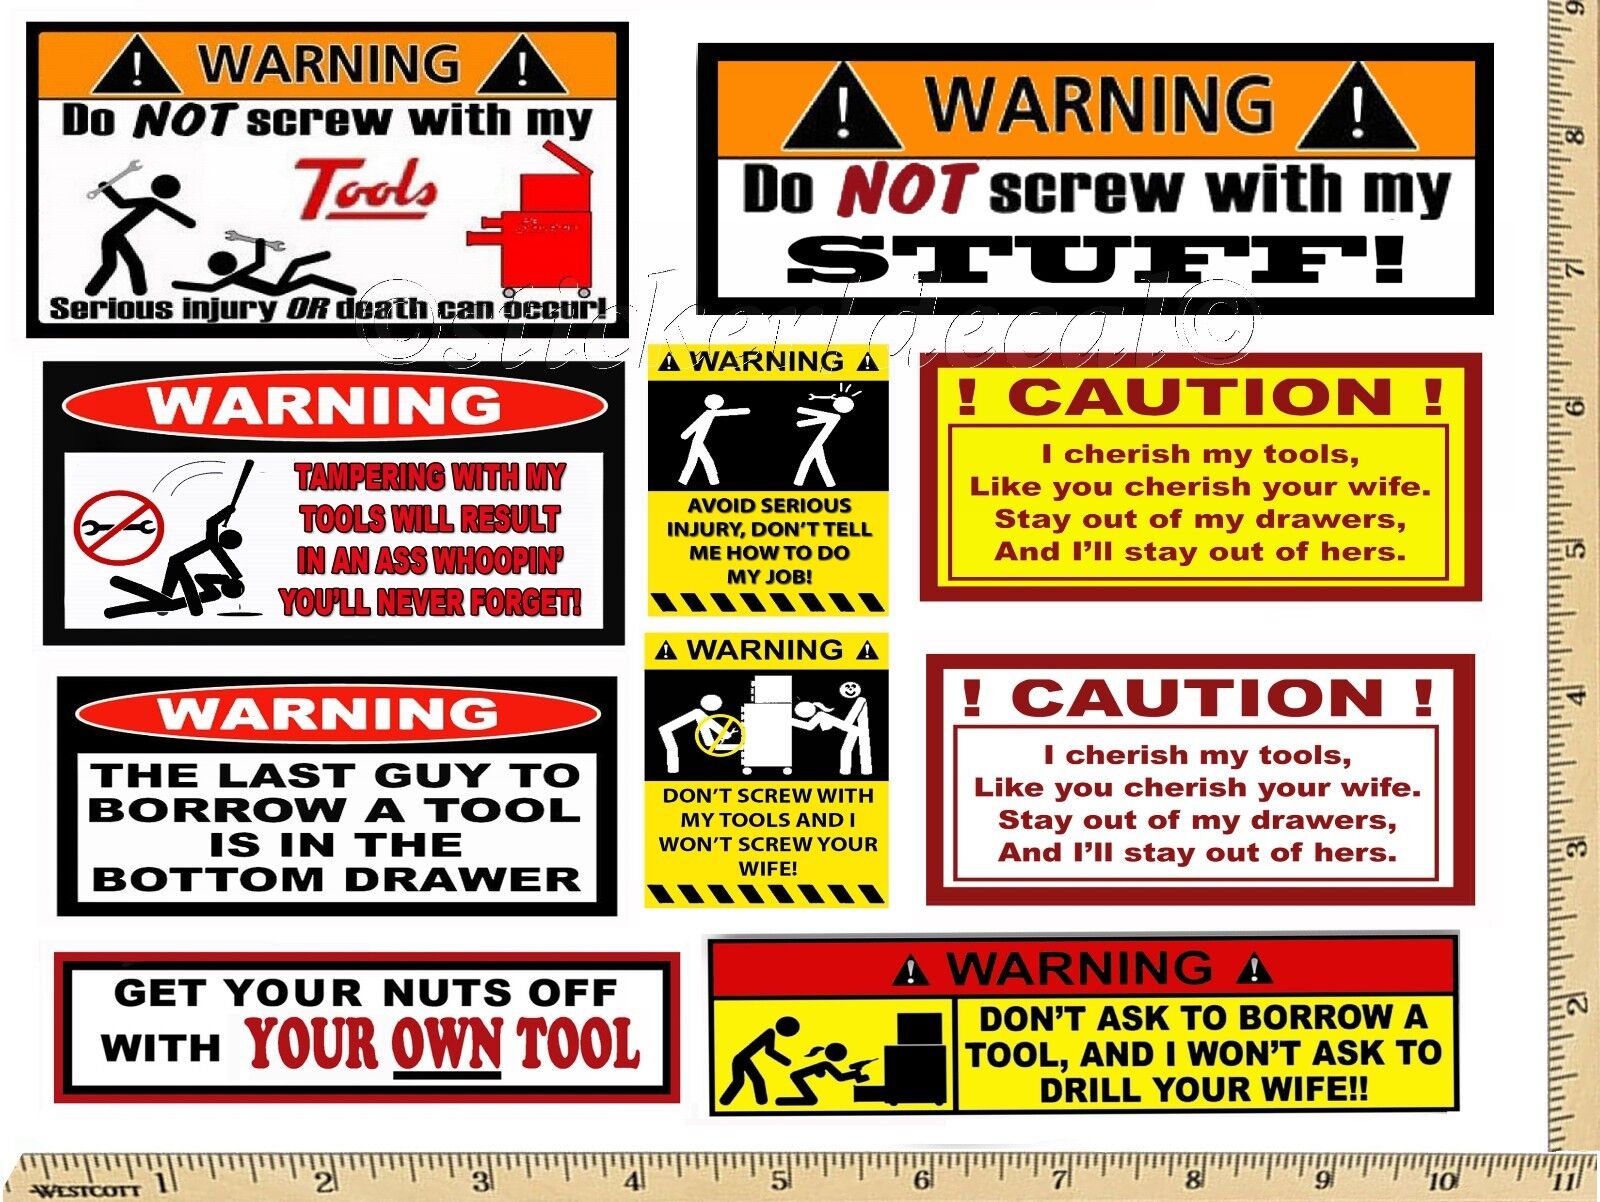 Funny Warning Stickers - Complete set of 10 Decals - Great For Toolbox USA  | eBay